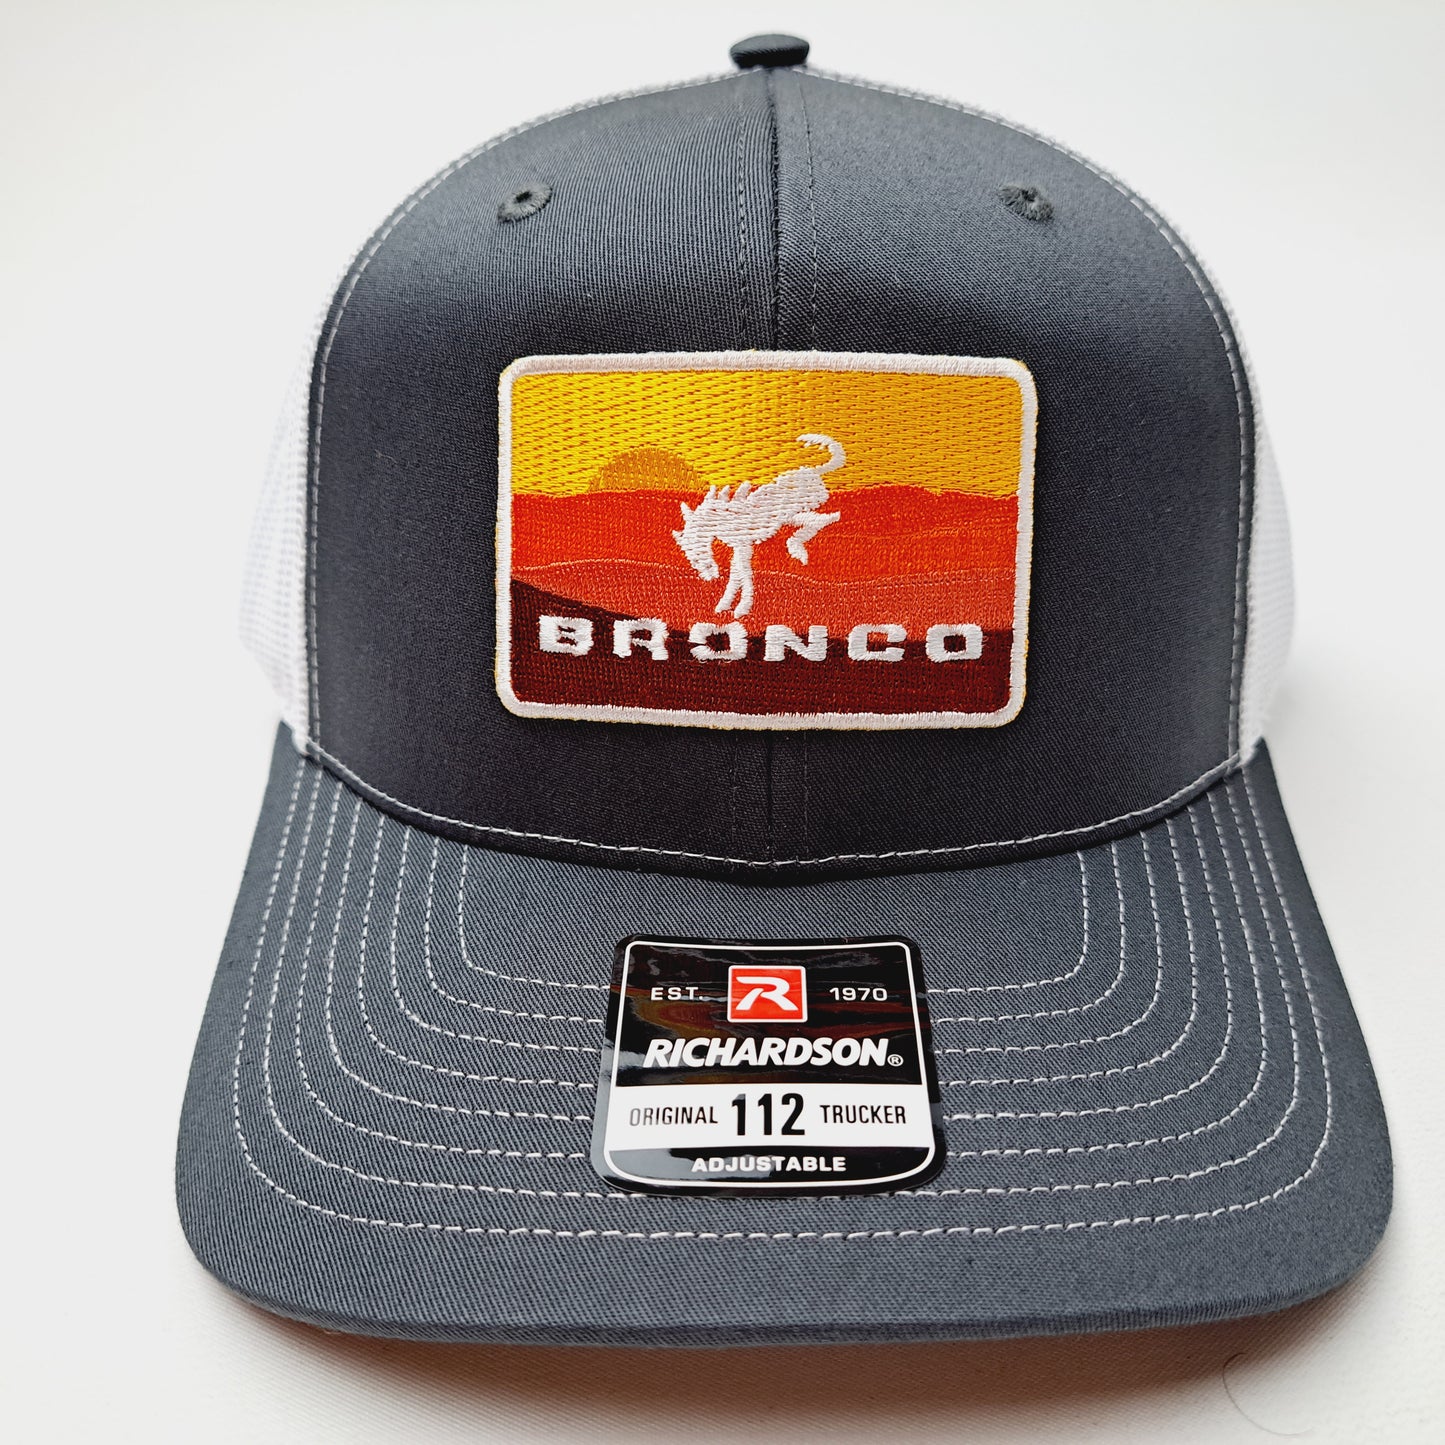 Ford Bronco Embroidered Patch Richardson 112 Trucker Mesh Snapback Cap Hat Gray & White